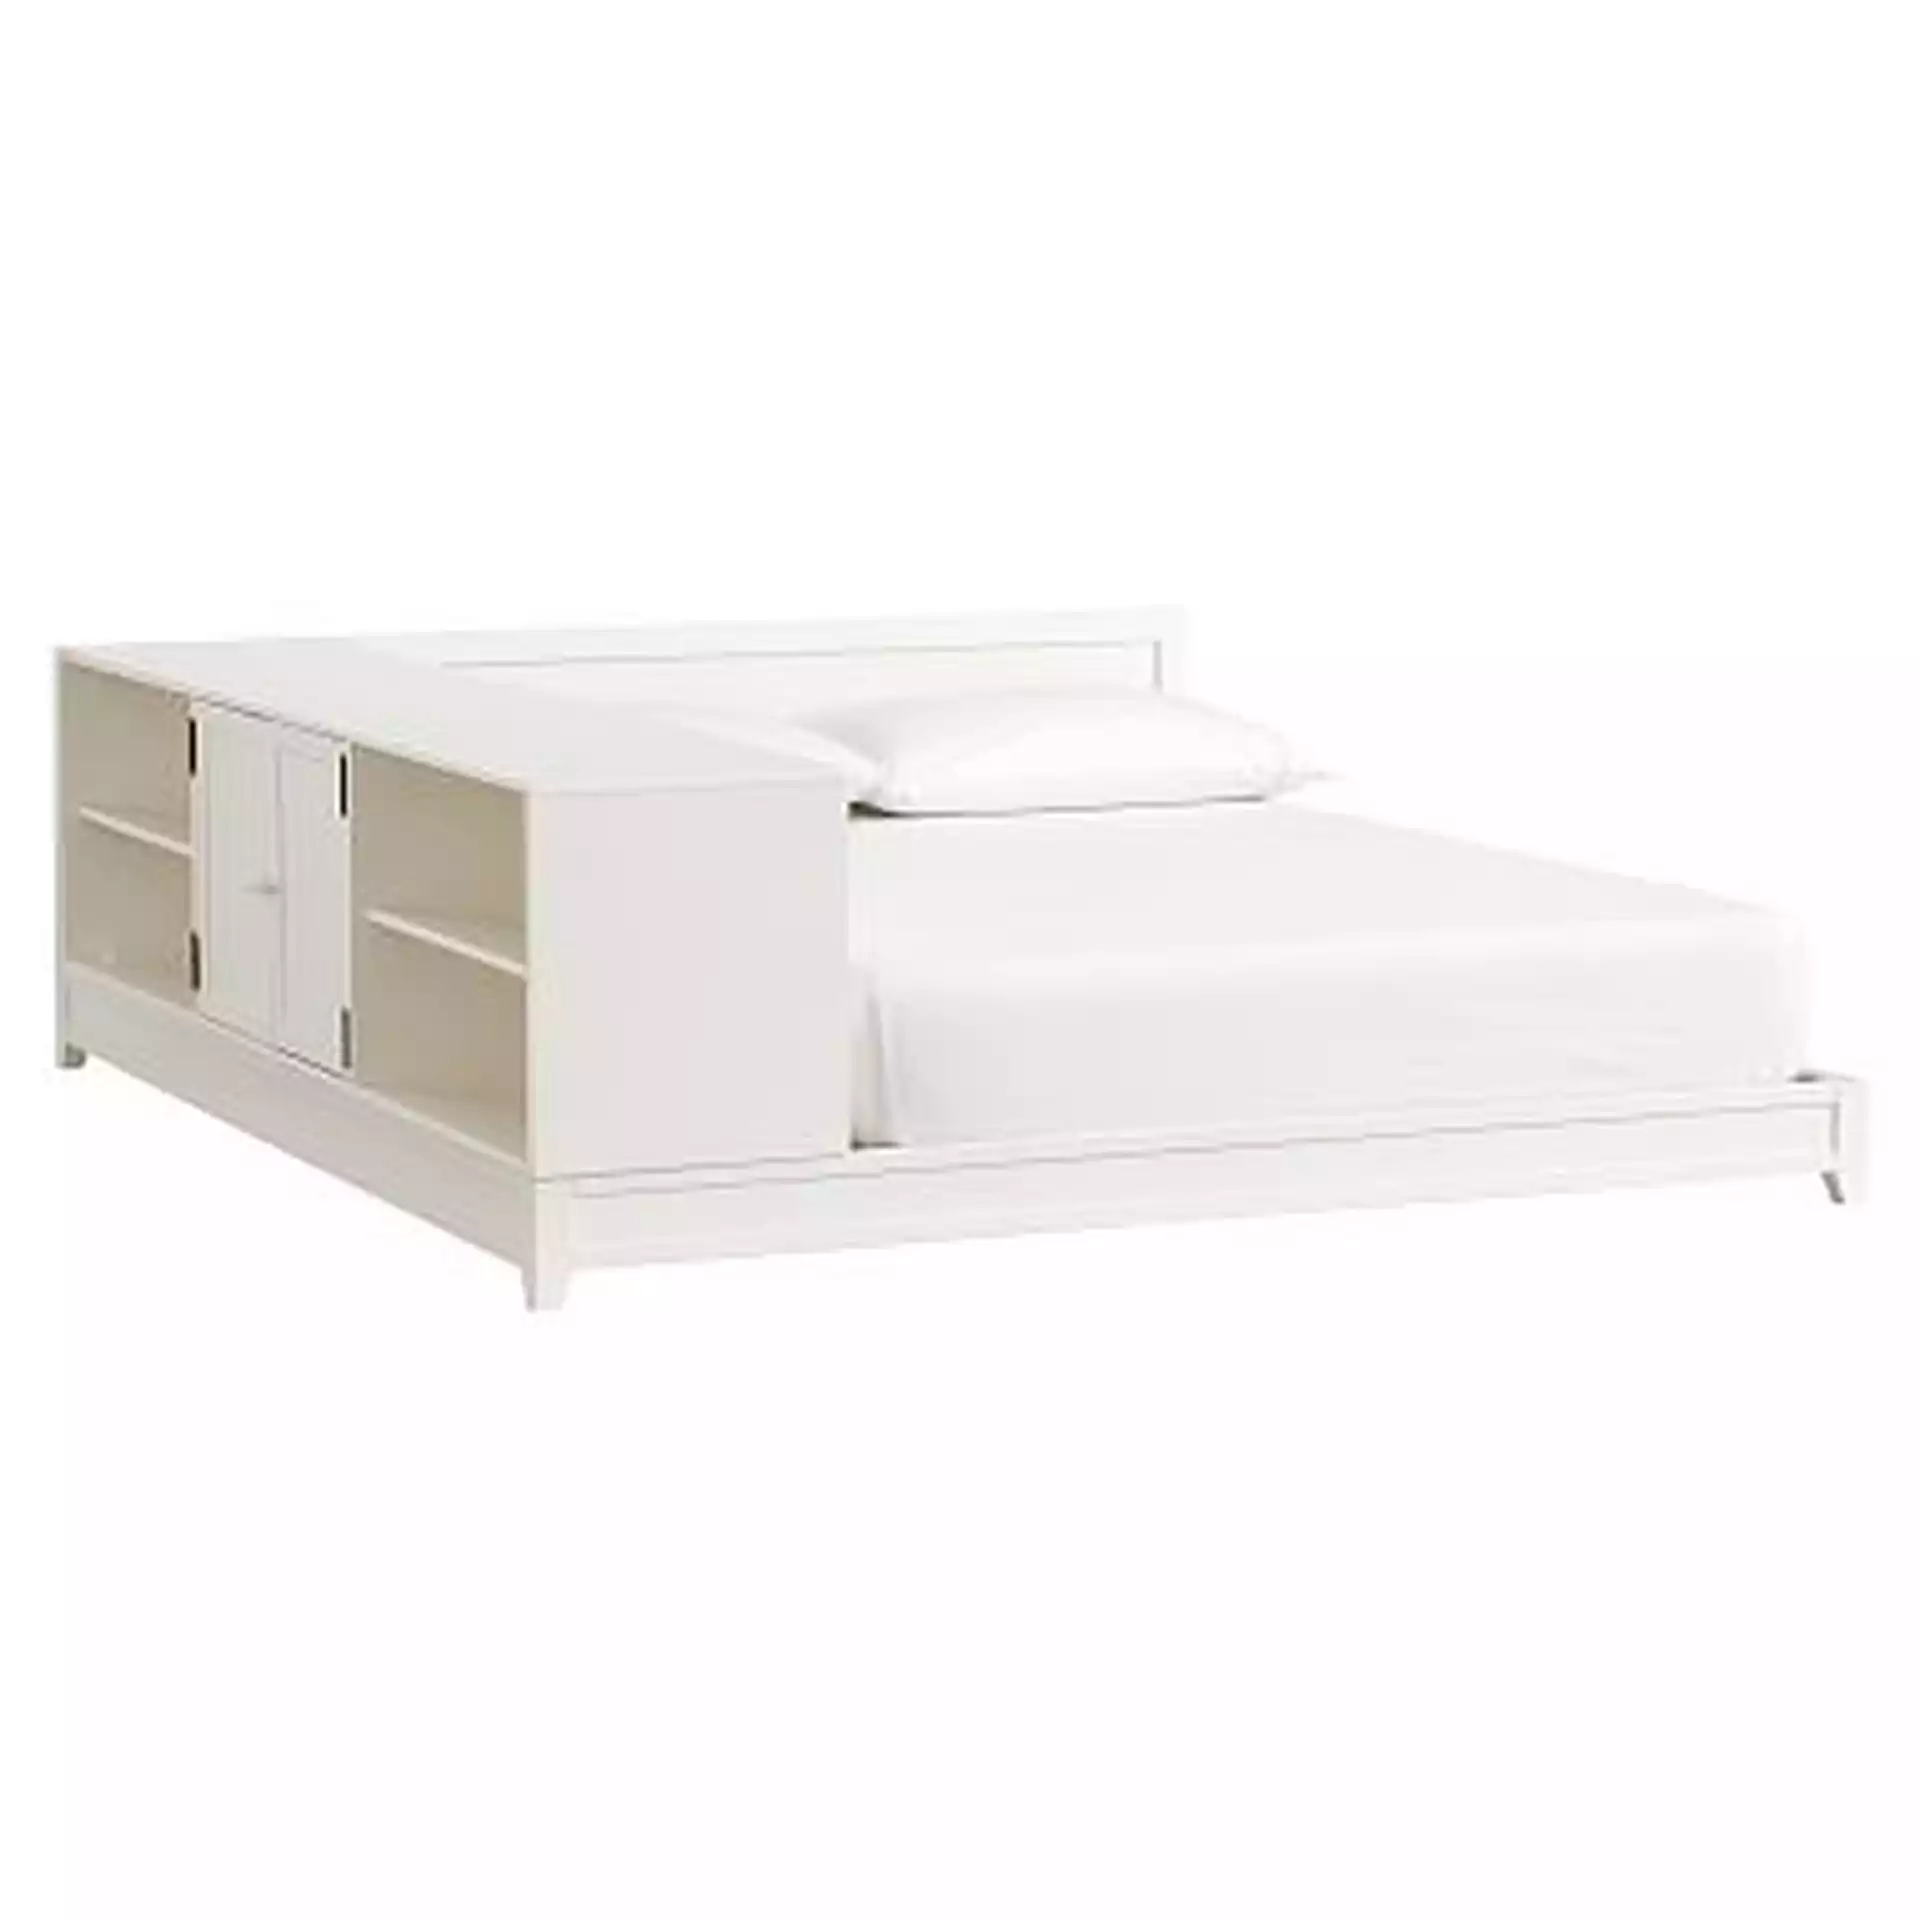 Ultimate Platform Bed + Cubby/ Cabinet Set, Queen, Water-Based Simply White